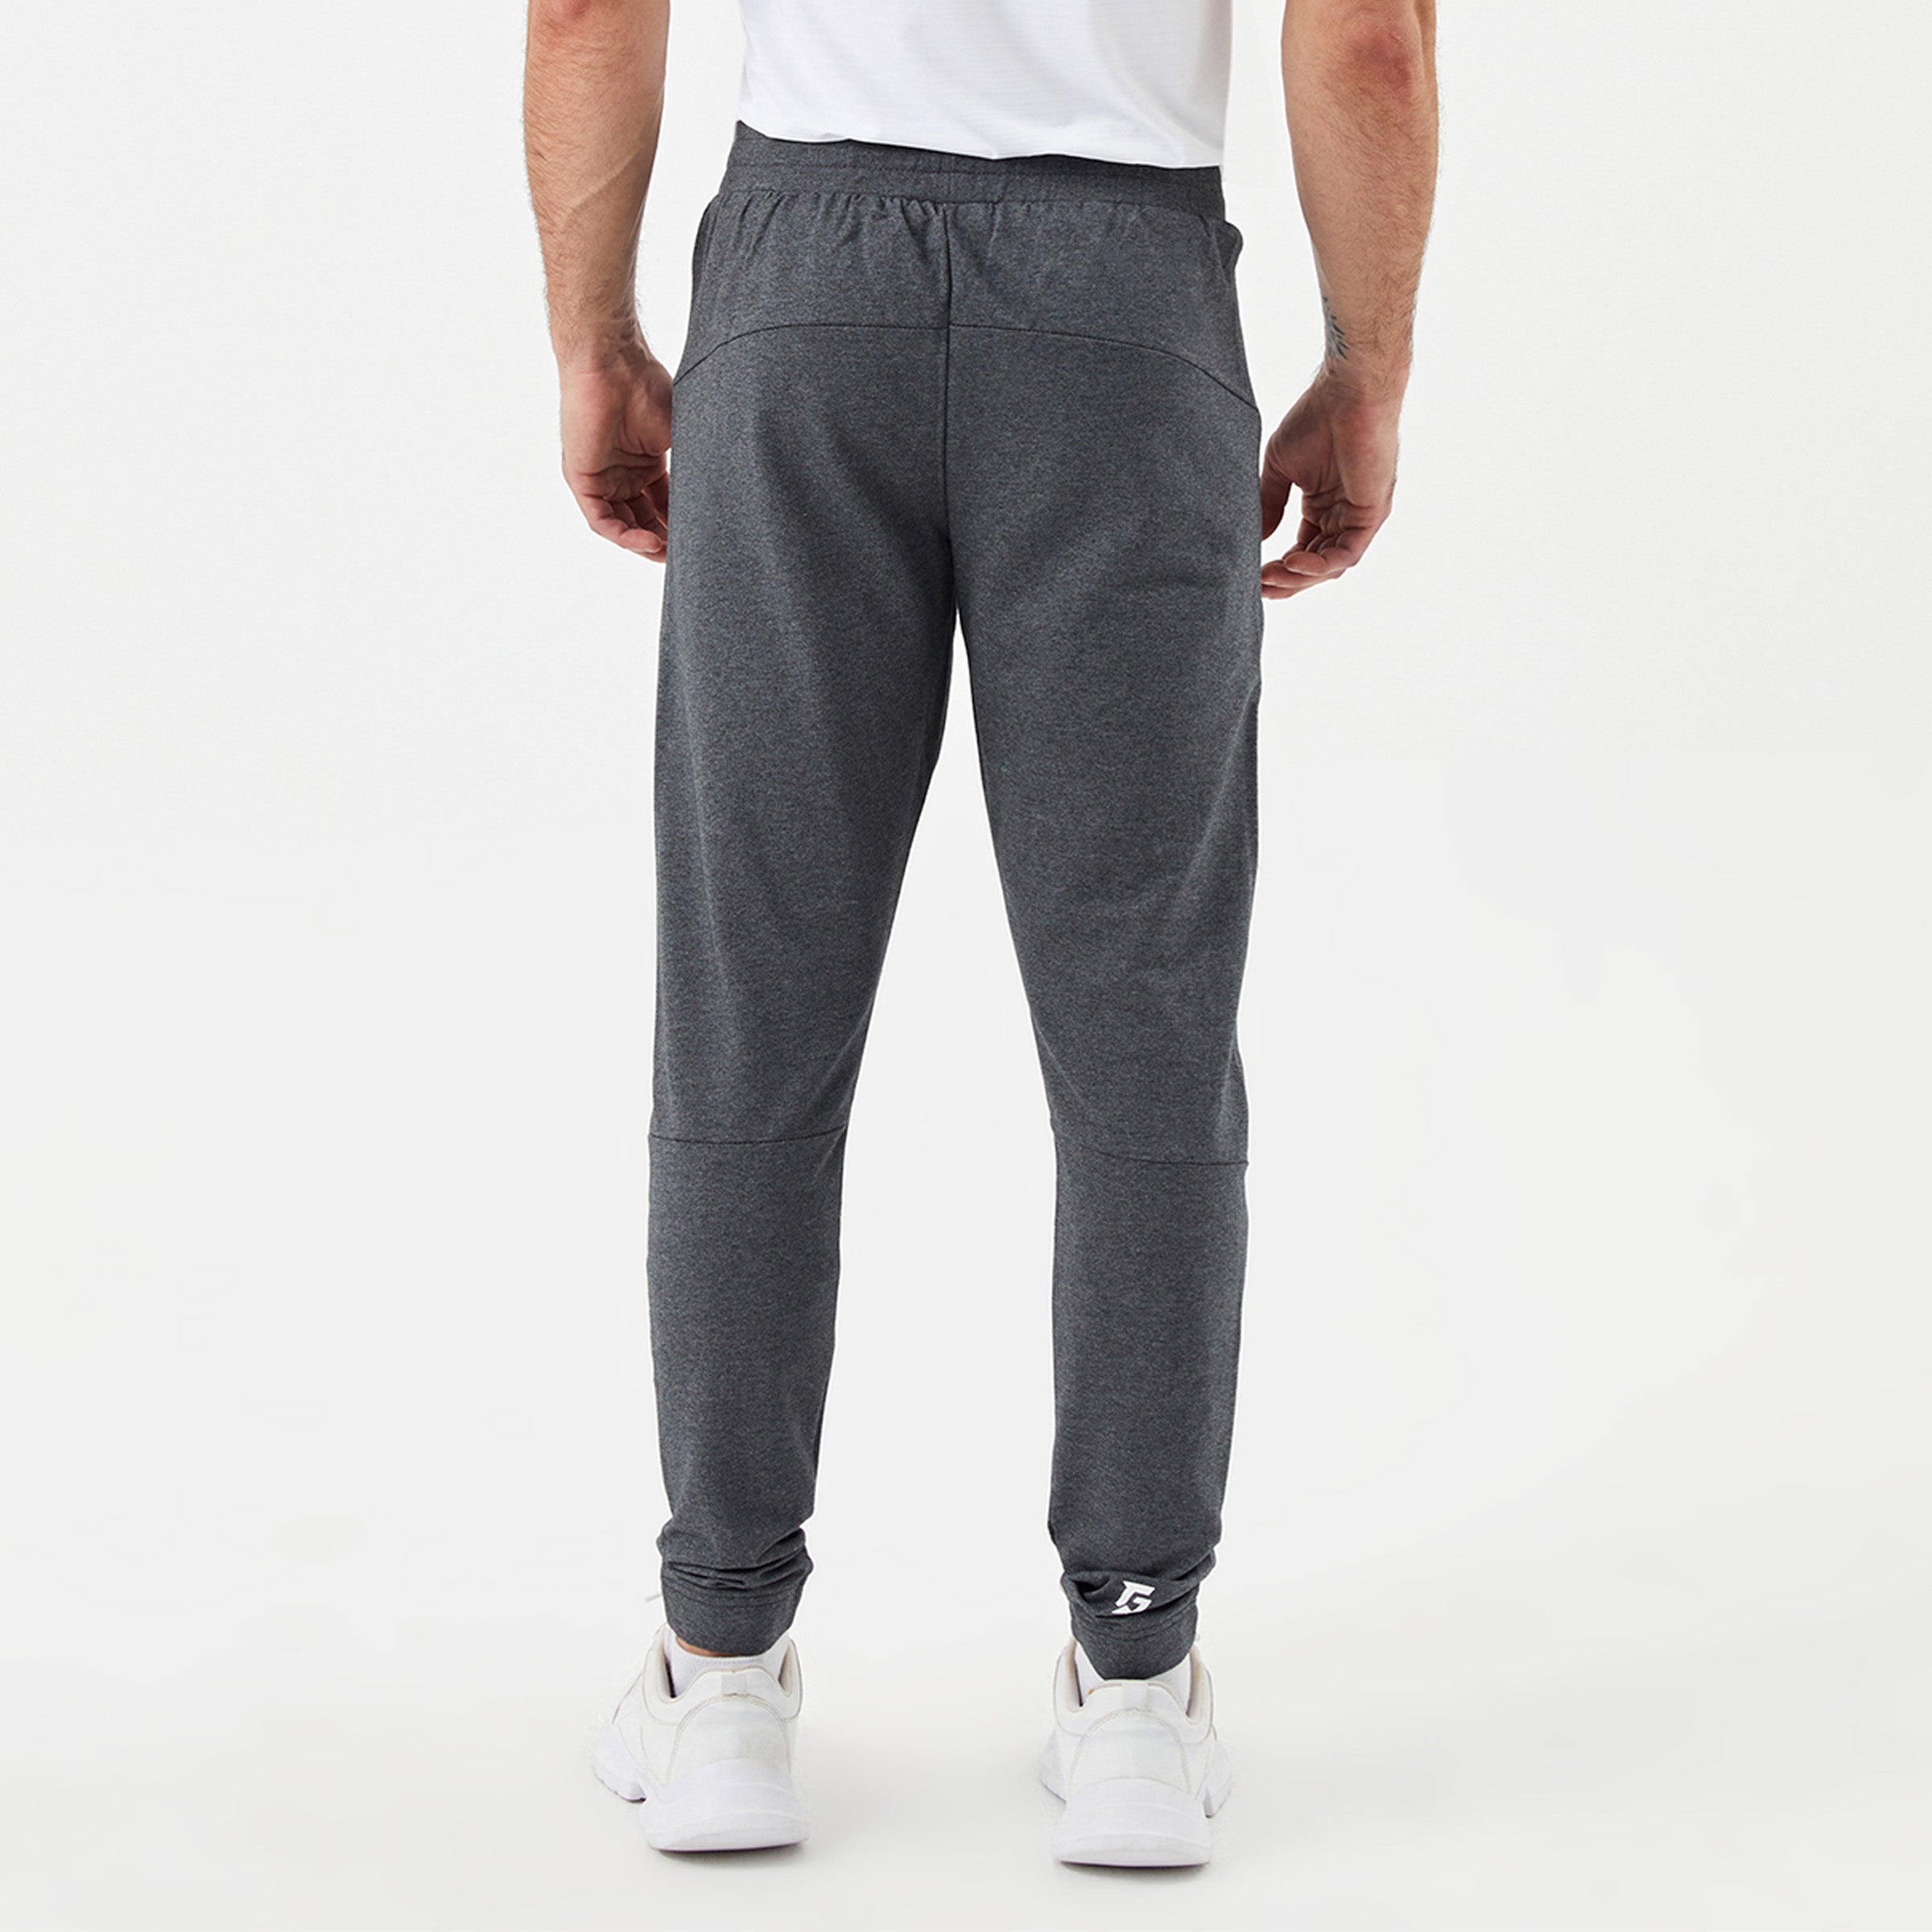 Target Bottoms (Charcoal)